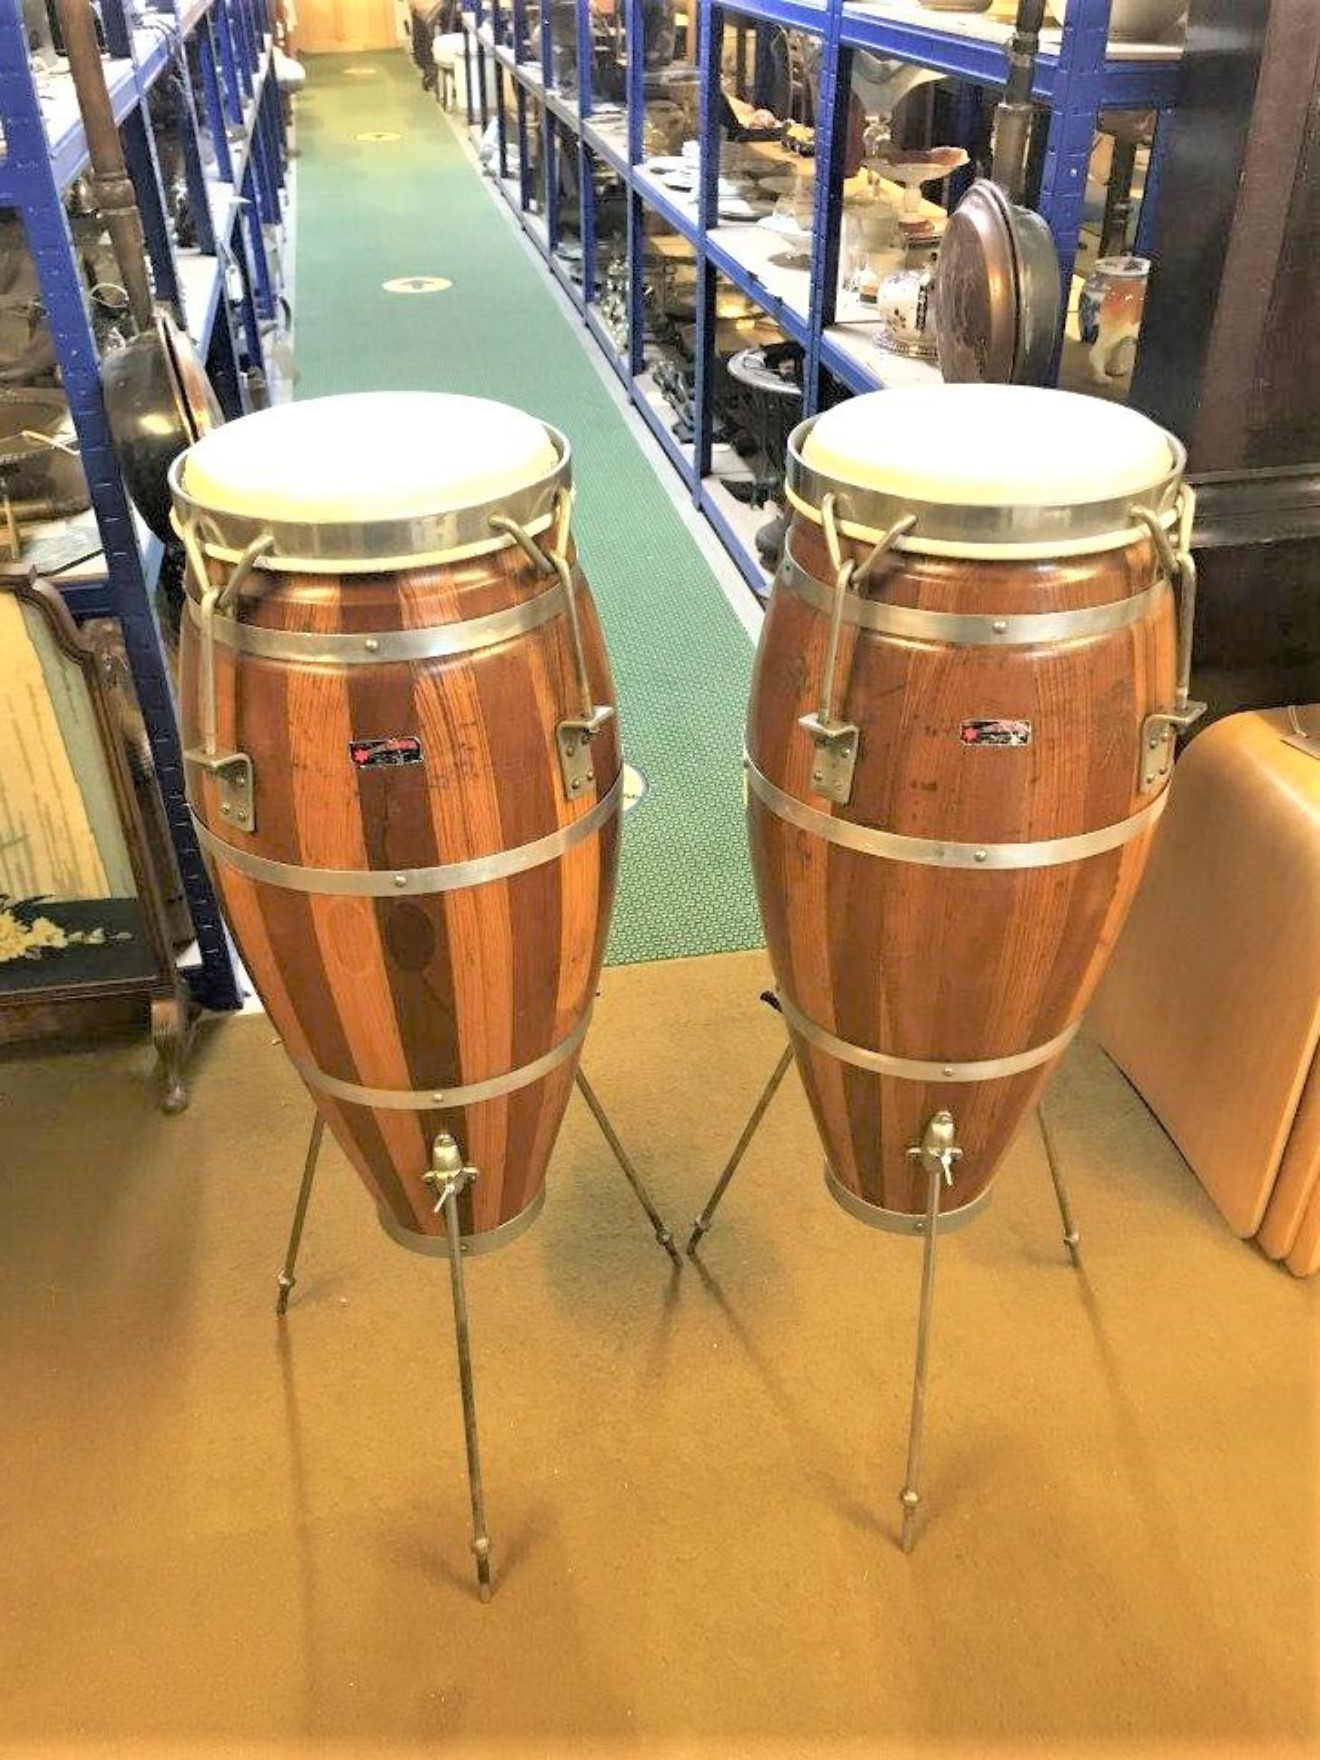 Vintage Pair of Mixed Wood Conga Drums